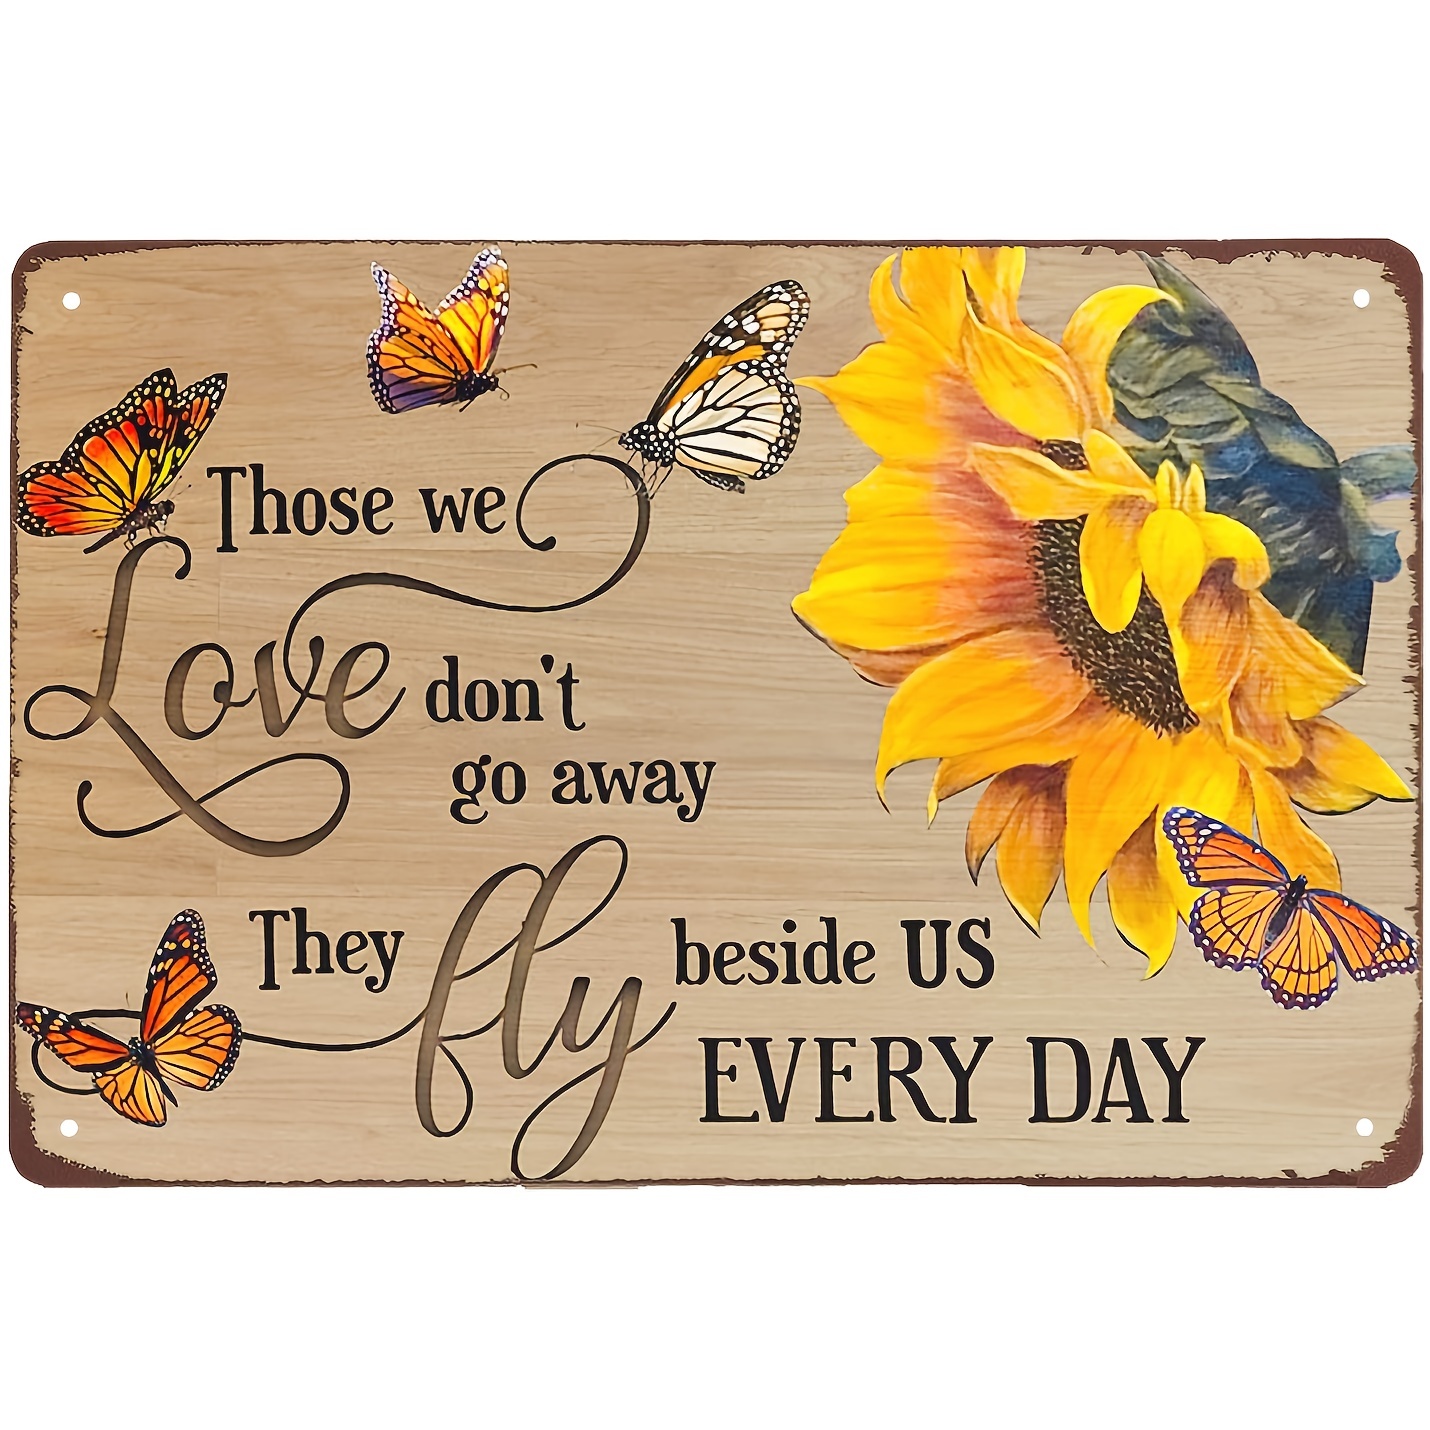 1pc Super Durable Metal Sign Those We Love Go Away They Fly Beside Us Every Day Sunflower And Butterfly Tin Sign Vintage Wall Decoration Home Garden Kitchen Art Sign 12x8 Inches